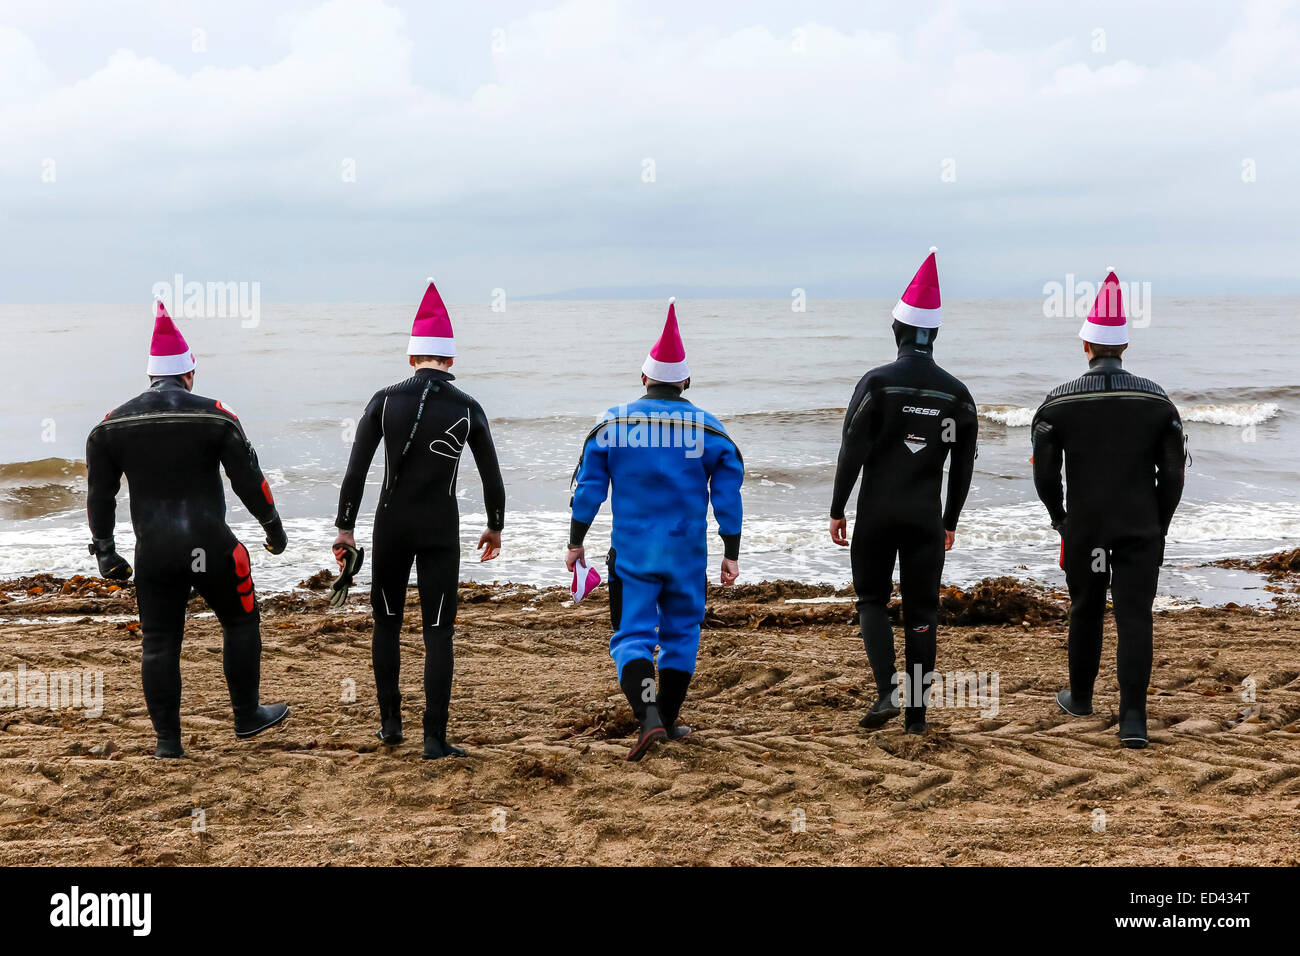 Prestwick, Scotland, UK. 26th Dec, 2014. The 9th annual clic sergent Boxing Day swim was held at Prestwick beach, Ayrshire, near to the hospice. This attracted over 200  swimmers many in fancy dress costumes were marched to the beach by local piper Billy Kenny. This year was particularly costly for Clicsergent when during the recent storms the hospice was struck twice by lightning causing over £200,000 worth of damage and disruption to care. The swimmers hope to raise over £25,000 by sponsorship. Credit:  Findlay/Alamy Live News Stock Photo